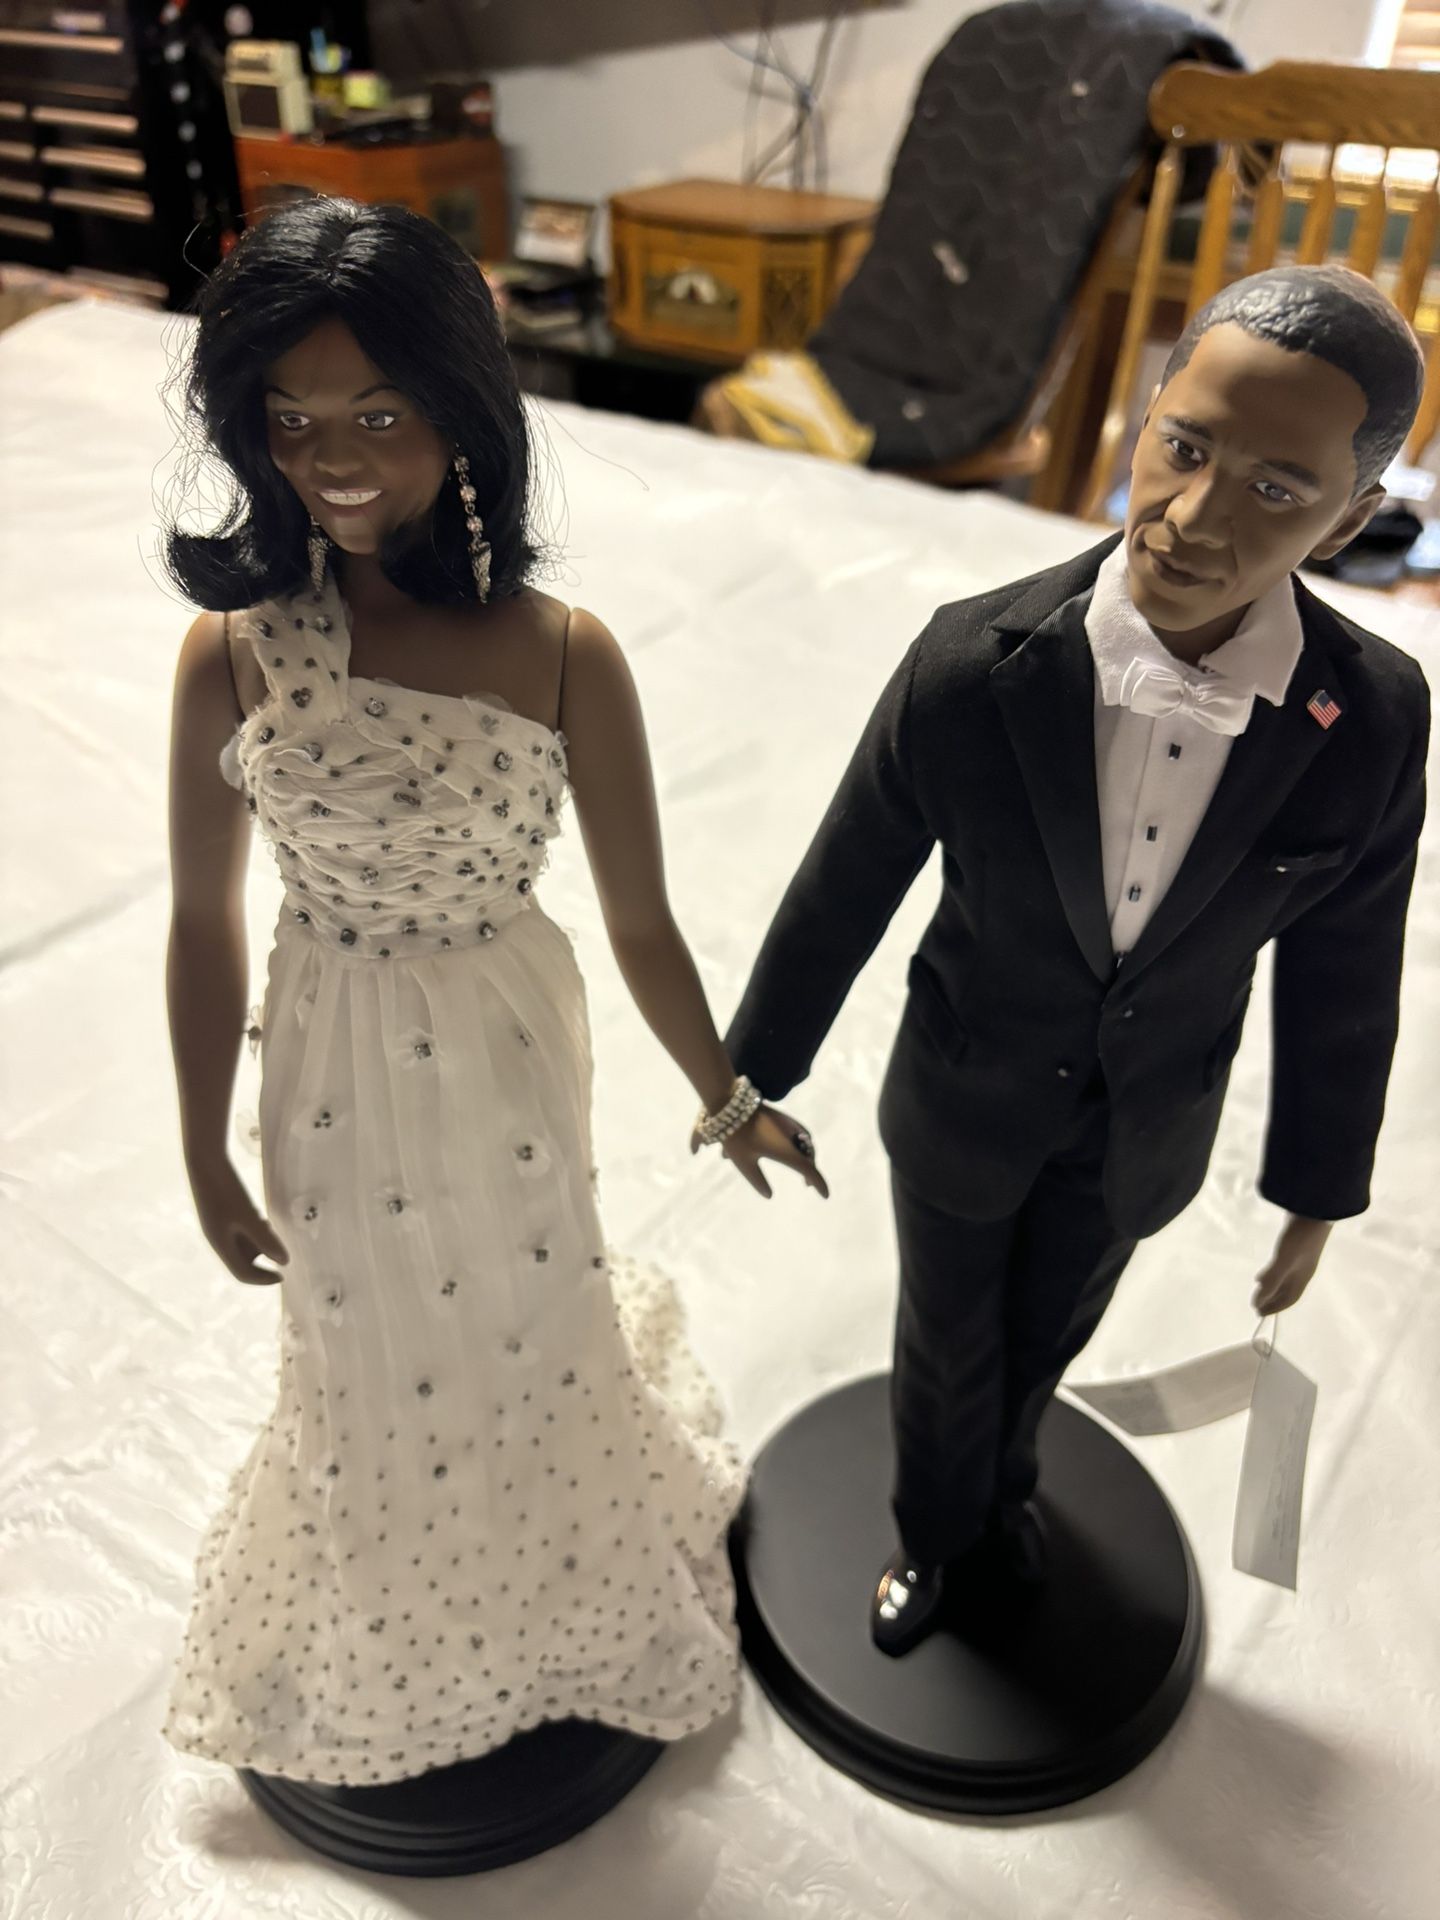 Collectible Obama Dolls